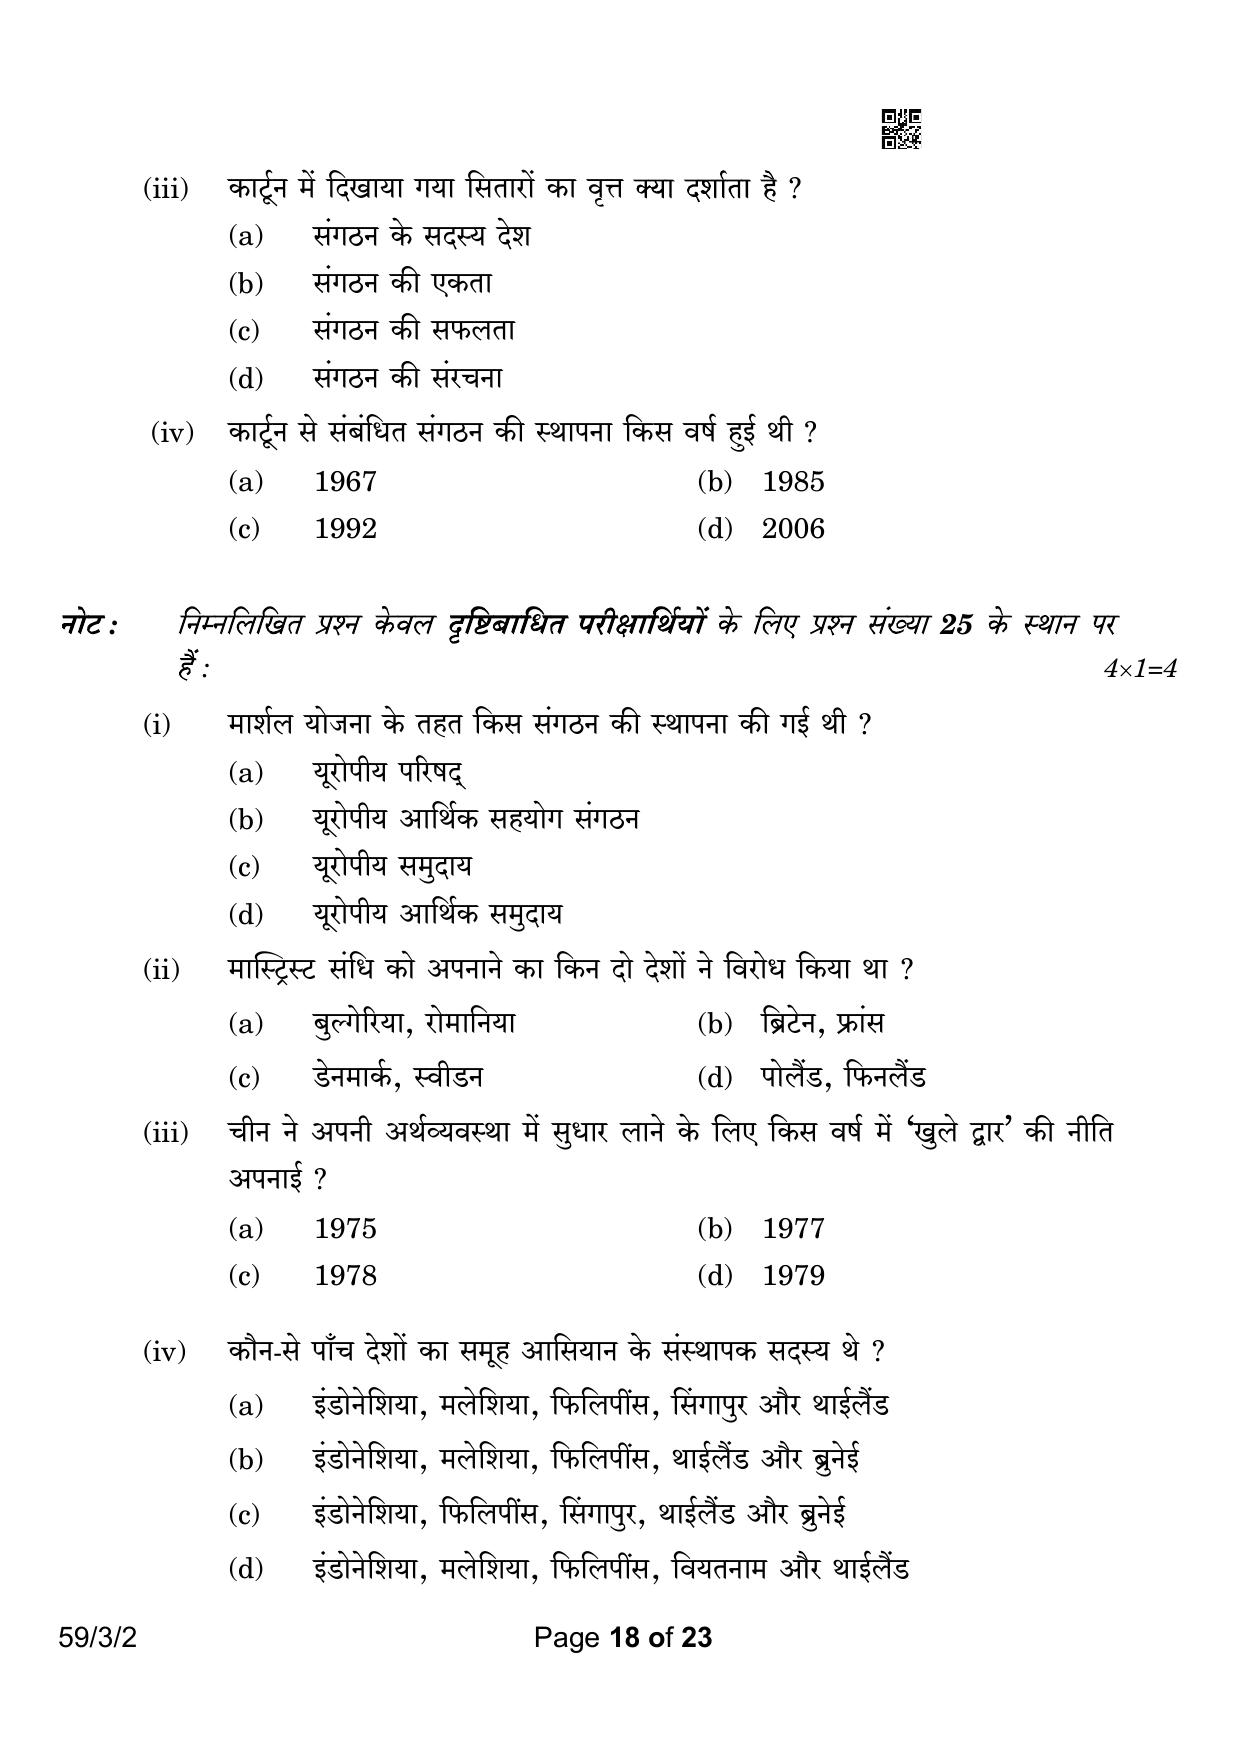 CBSE Class 12 59-3-2 Political Science 2023 Question Paper - Page 18